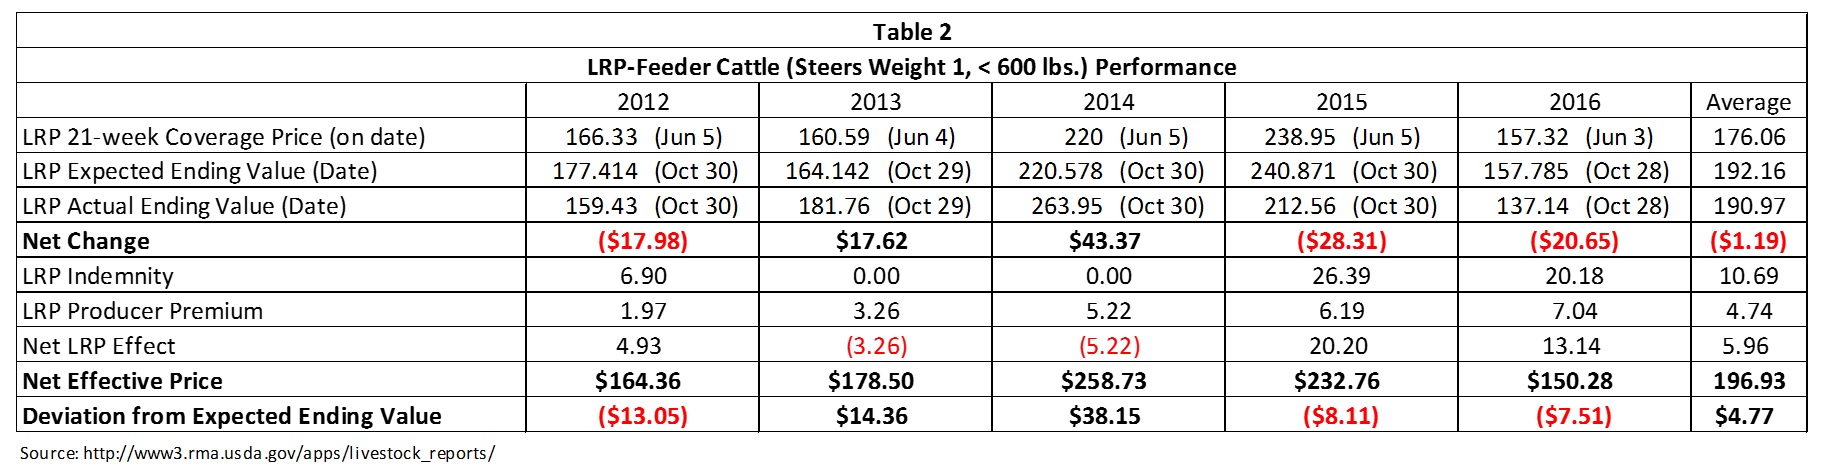 Table 2 shows how LRP Feeder Cattle insurance contracts would have performed for Steers Weight 1 from 2012-2016.